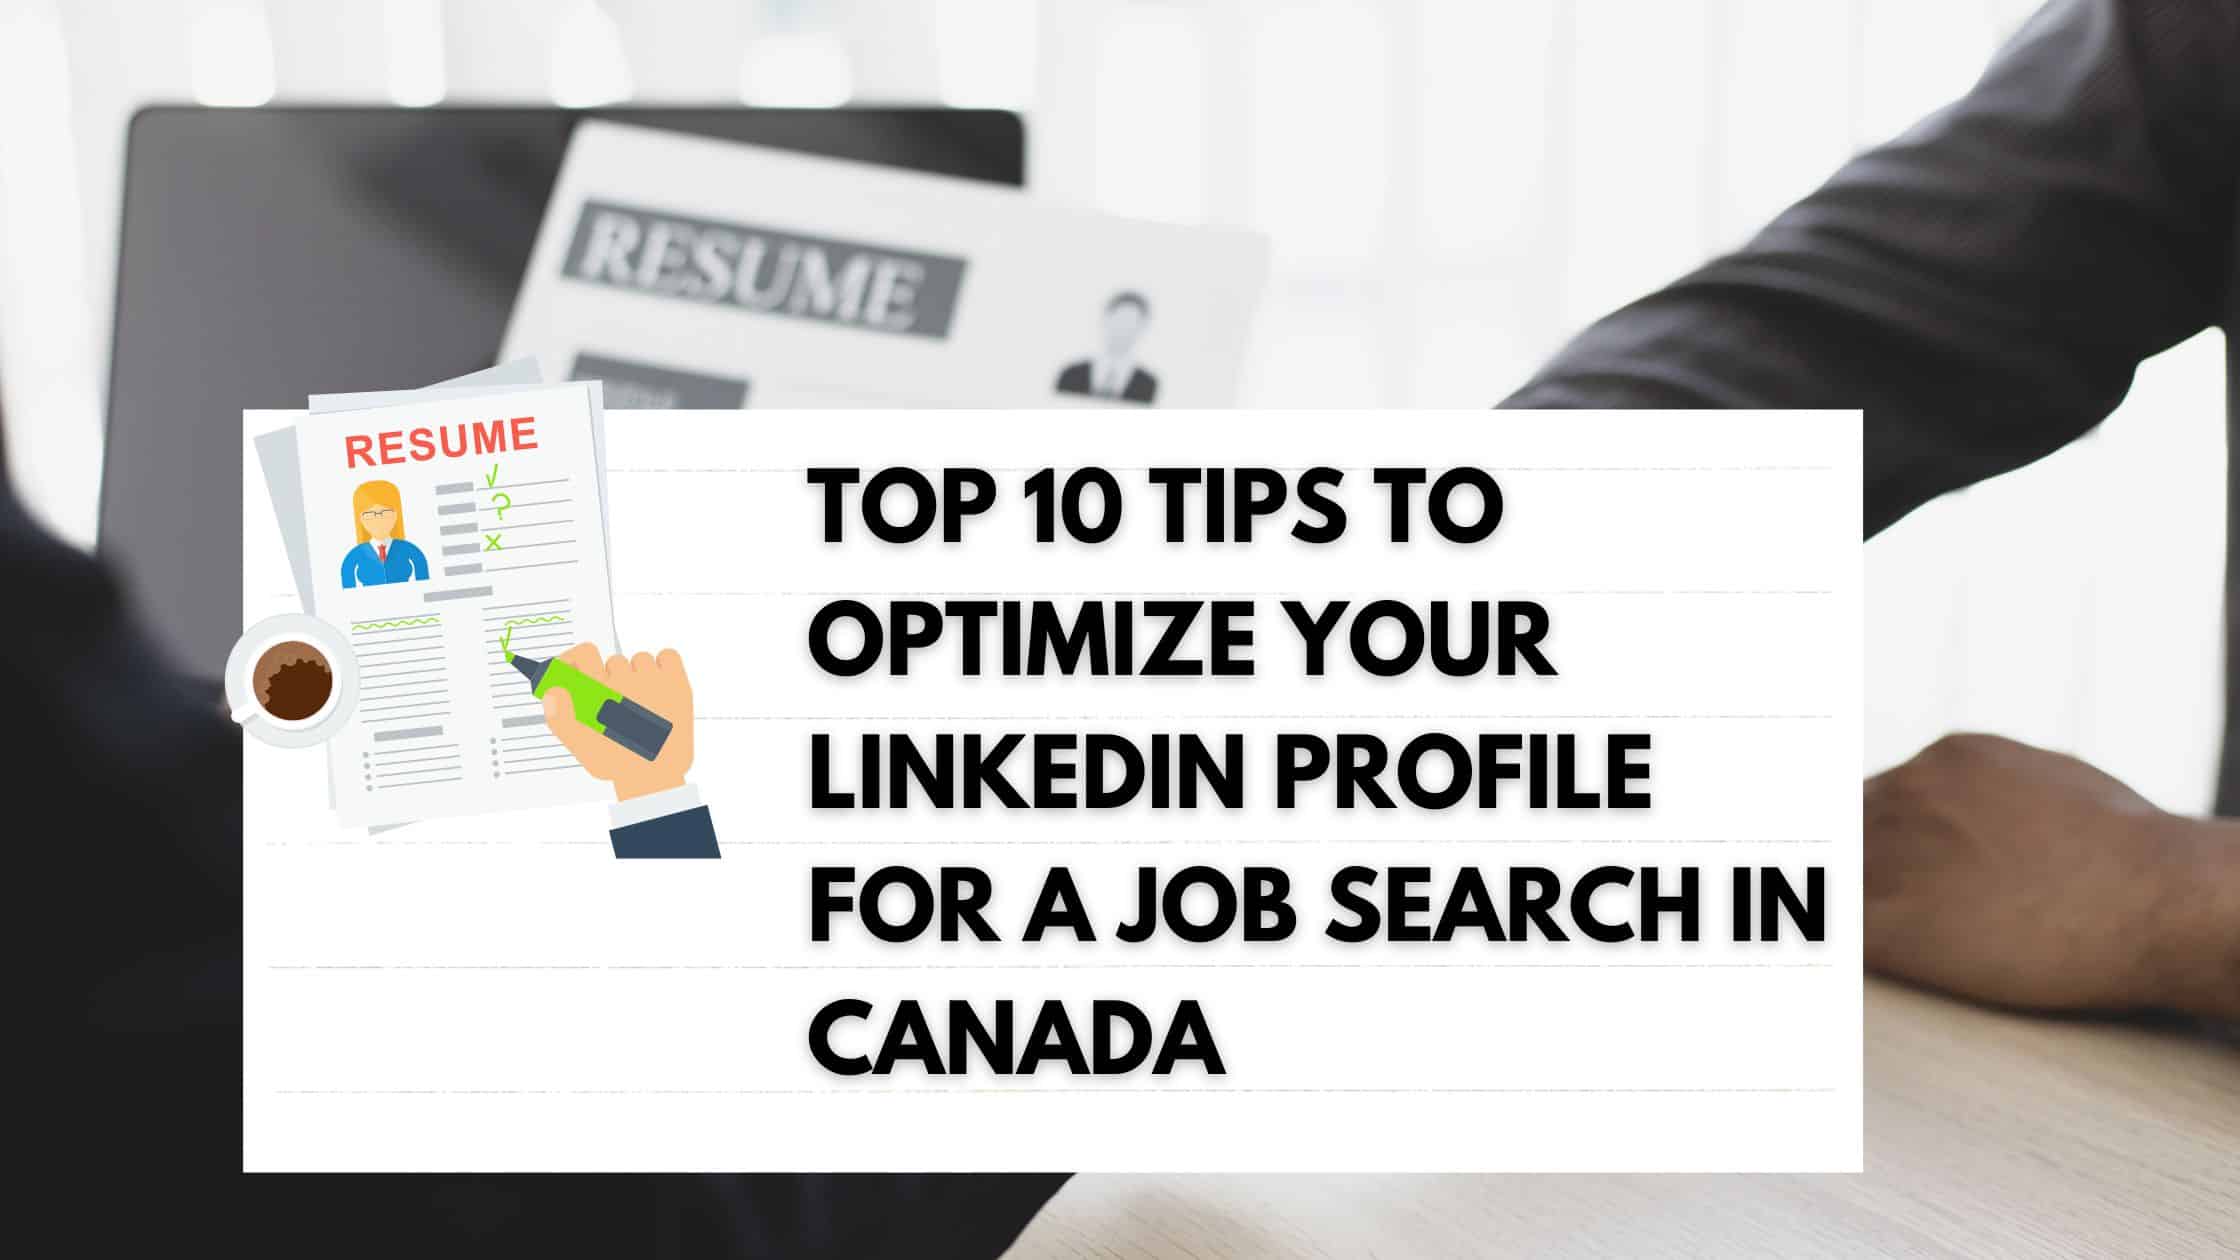 How To Create A Strong LinkedIn Profile For Job Hunting In Canada?